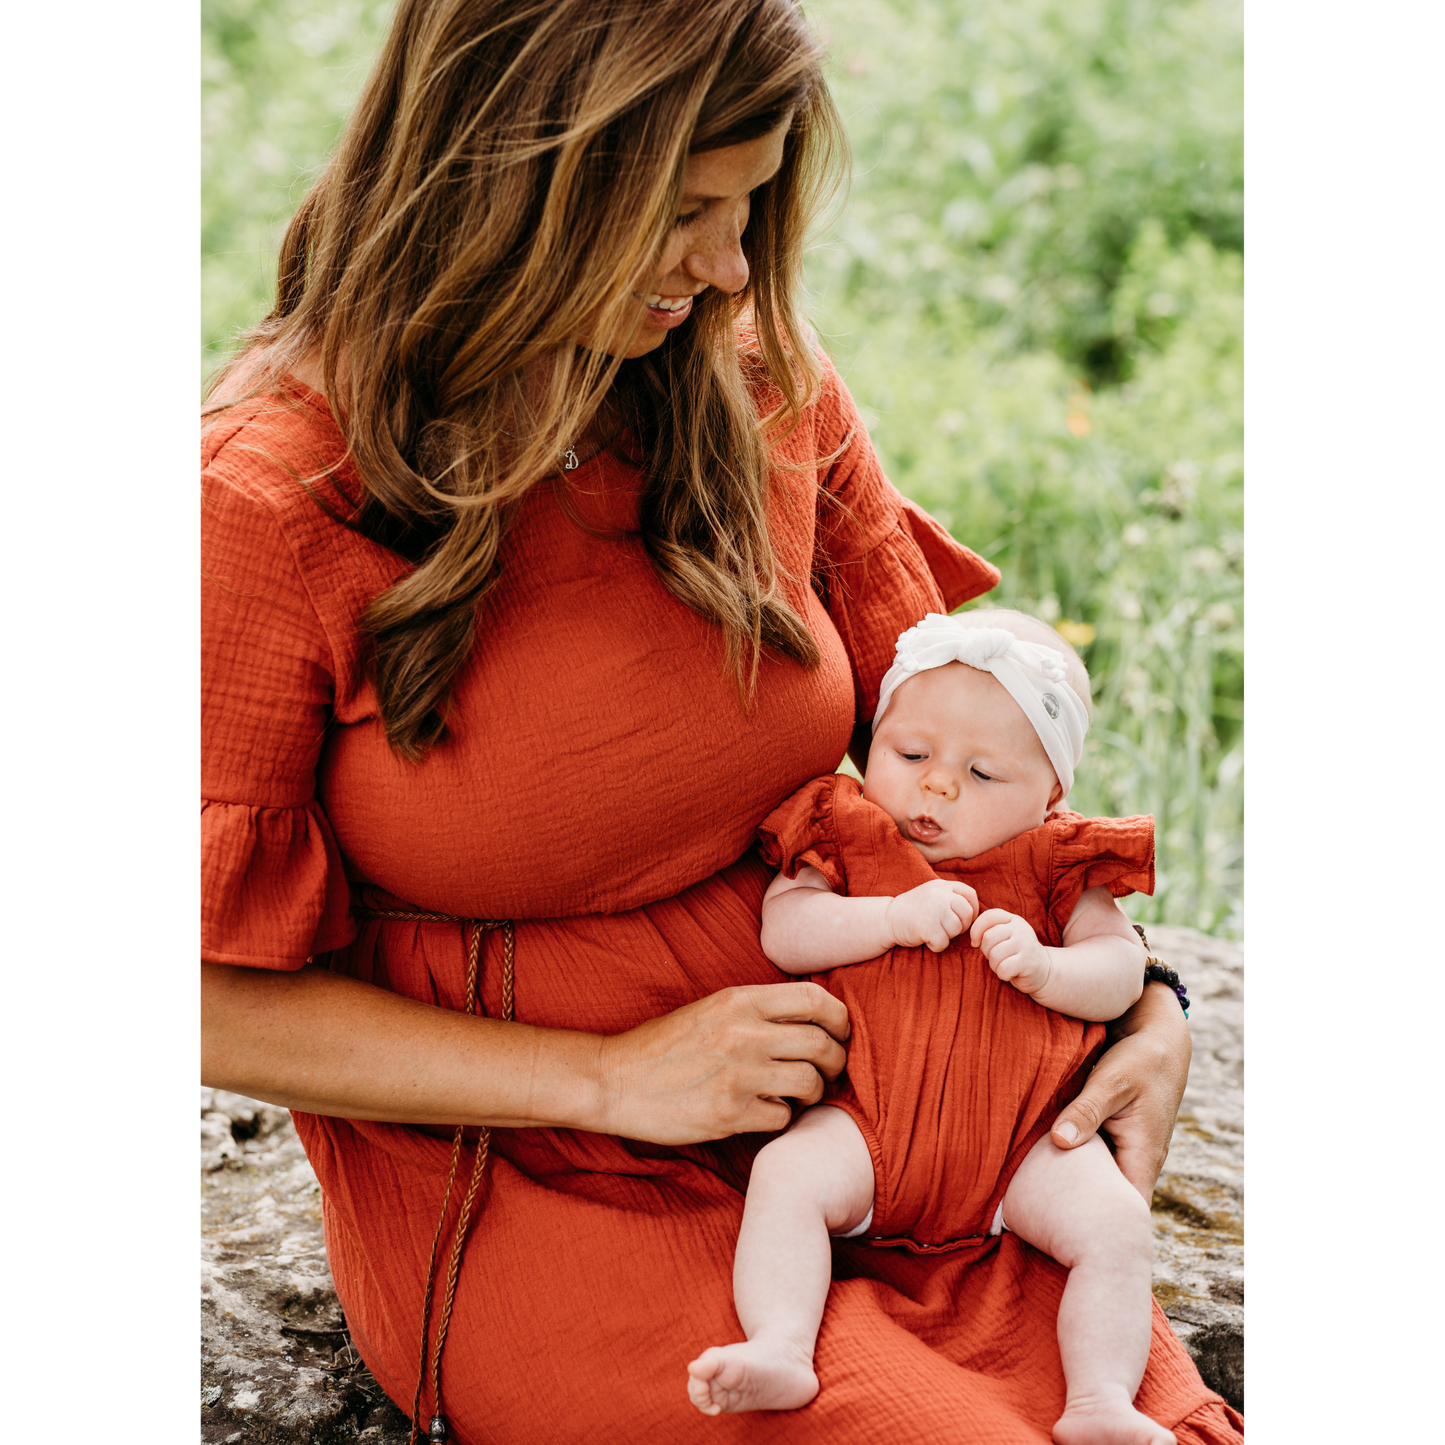 Rust Colored Midi High Low Mommy & Me Dresses